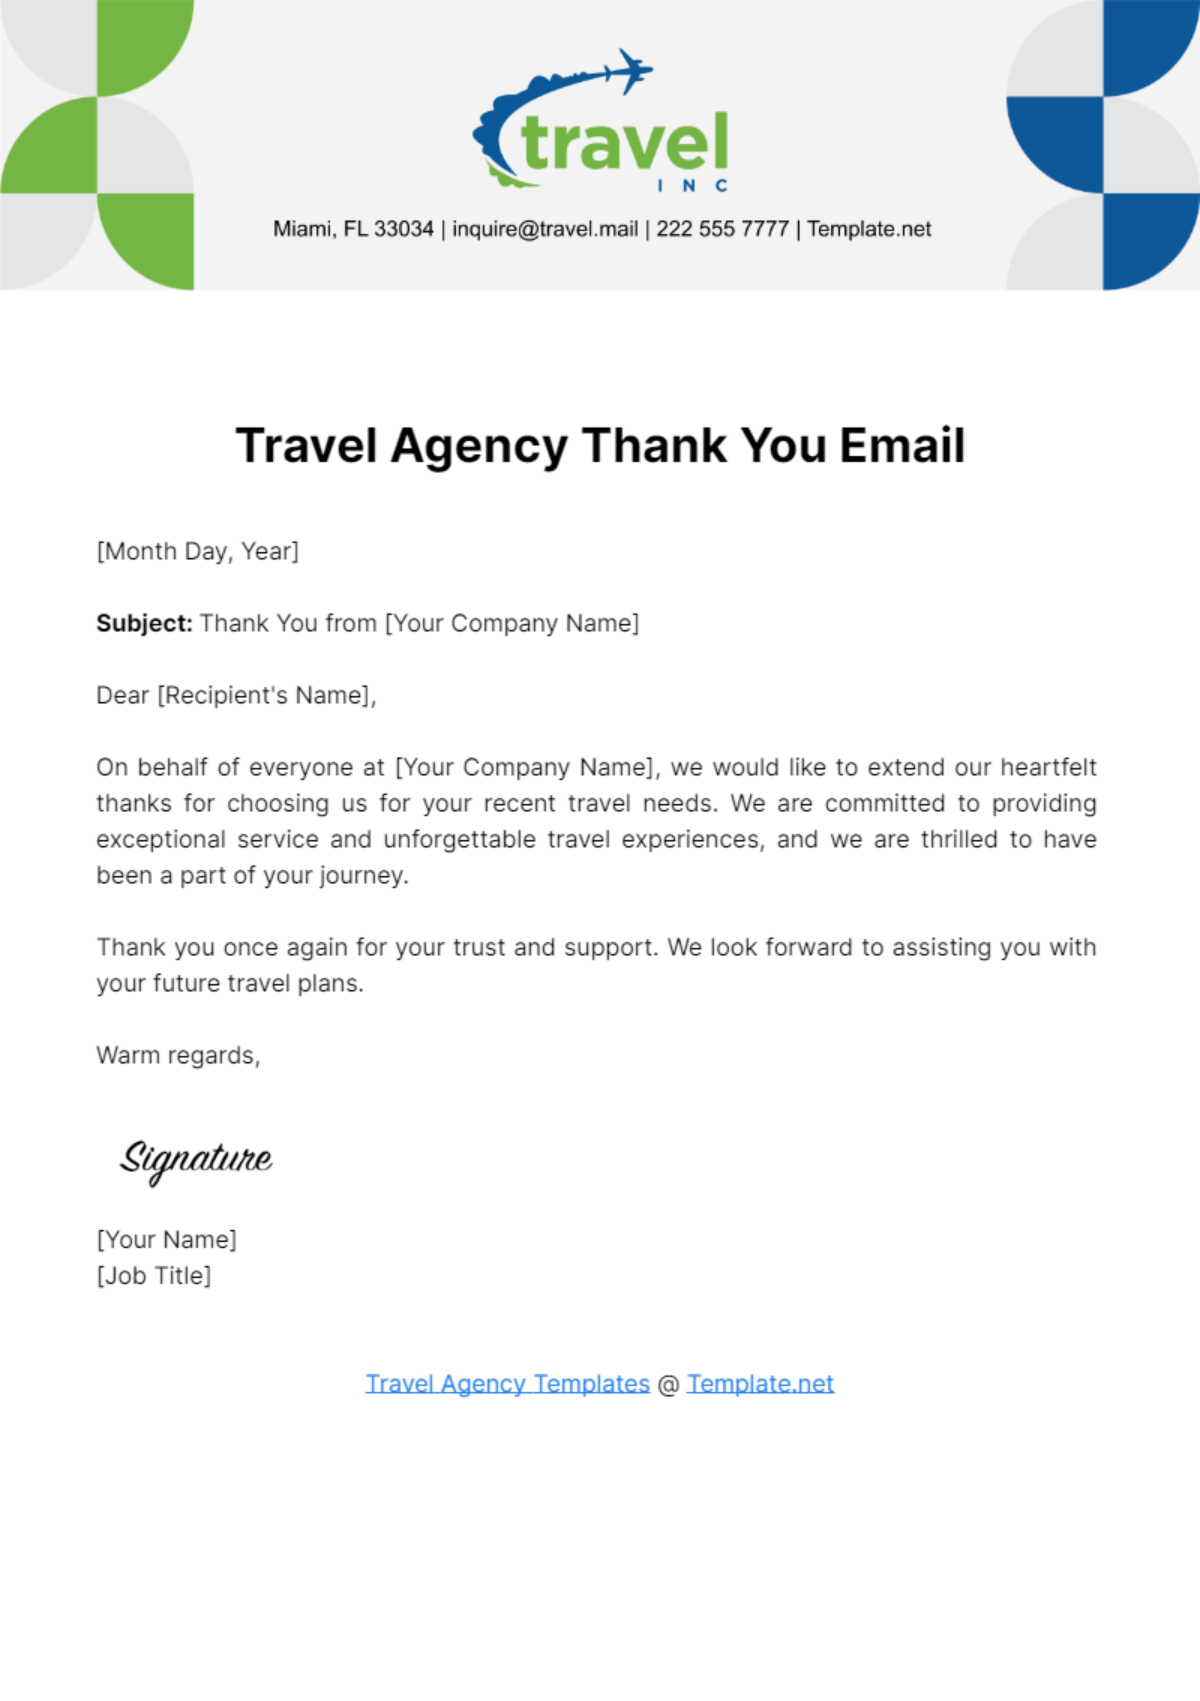 Travel Agency Thank You Email Template